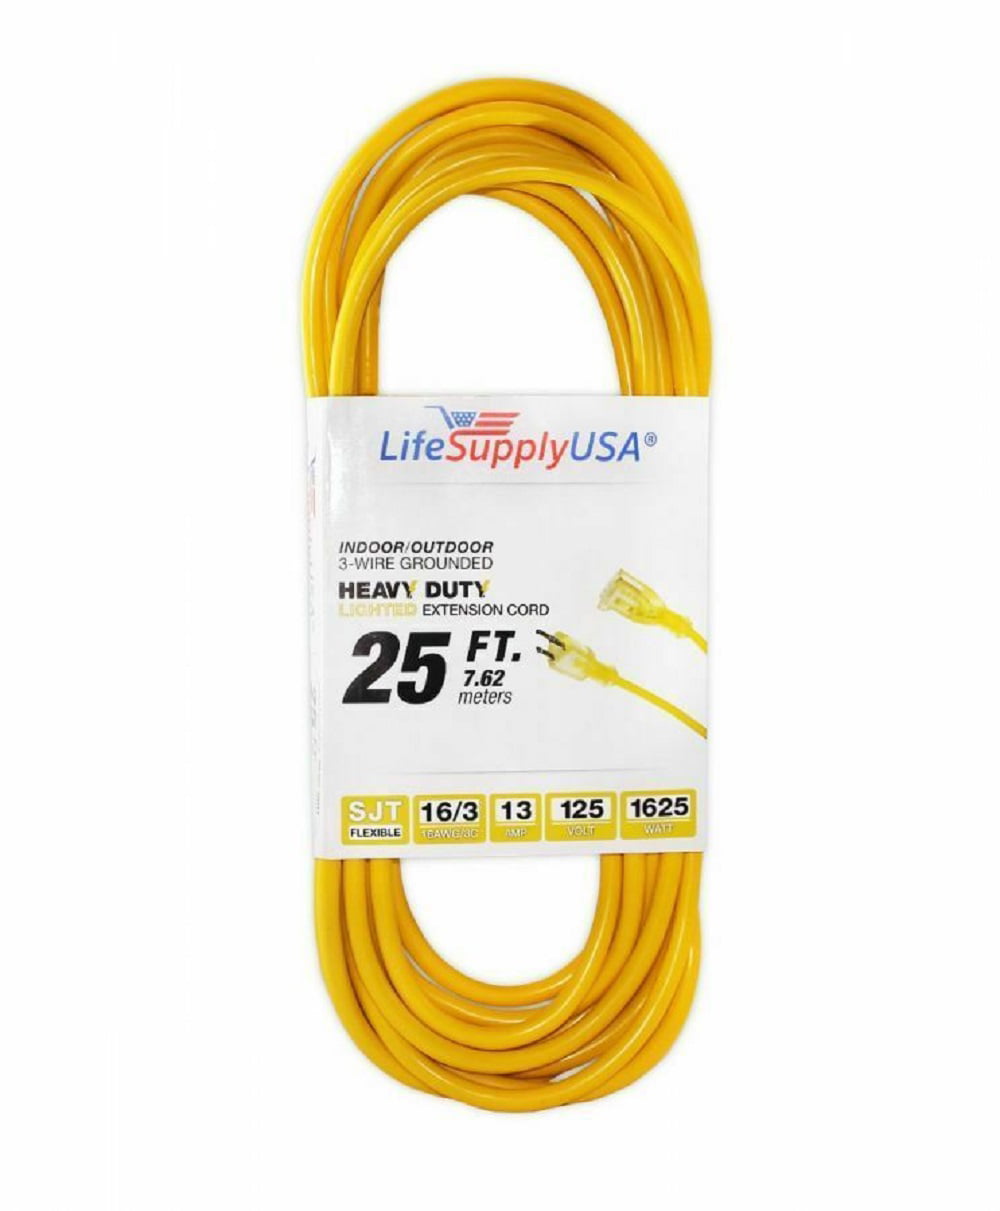 6 10 25 50 75 100 200 ft foot feet 14/3 300V SJTW Extension Cord LIGHTED END 